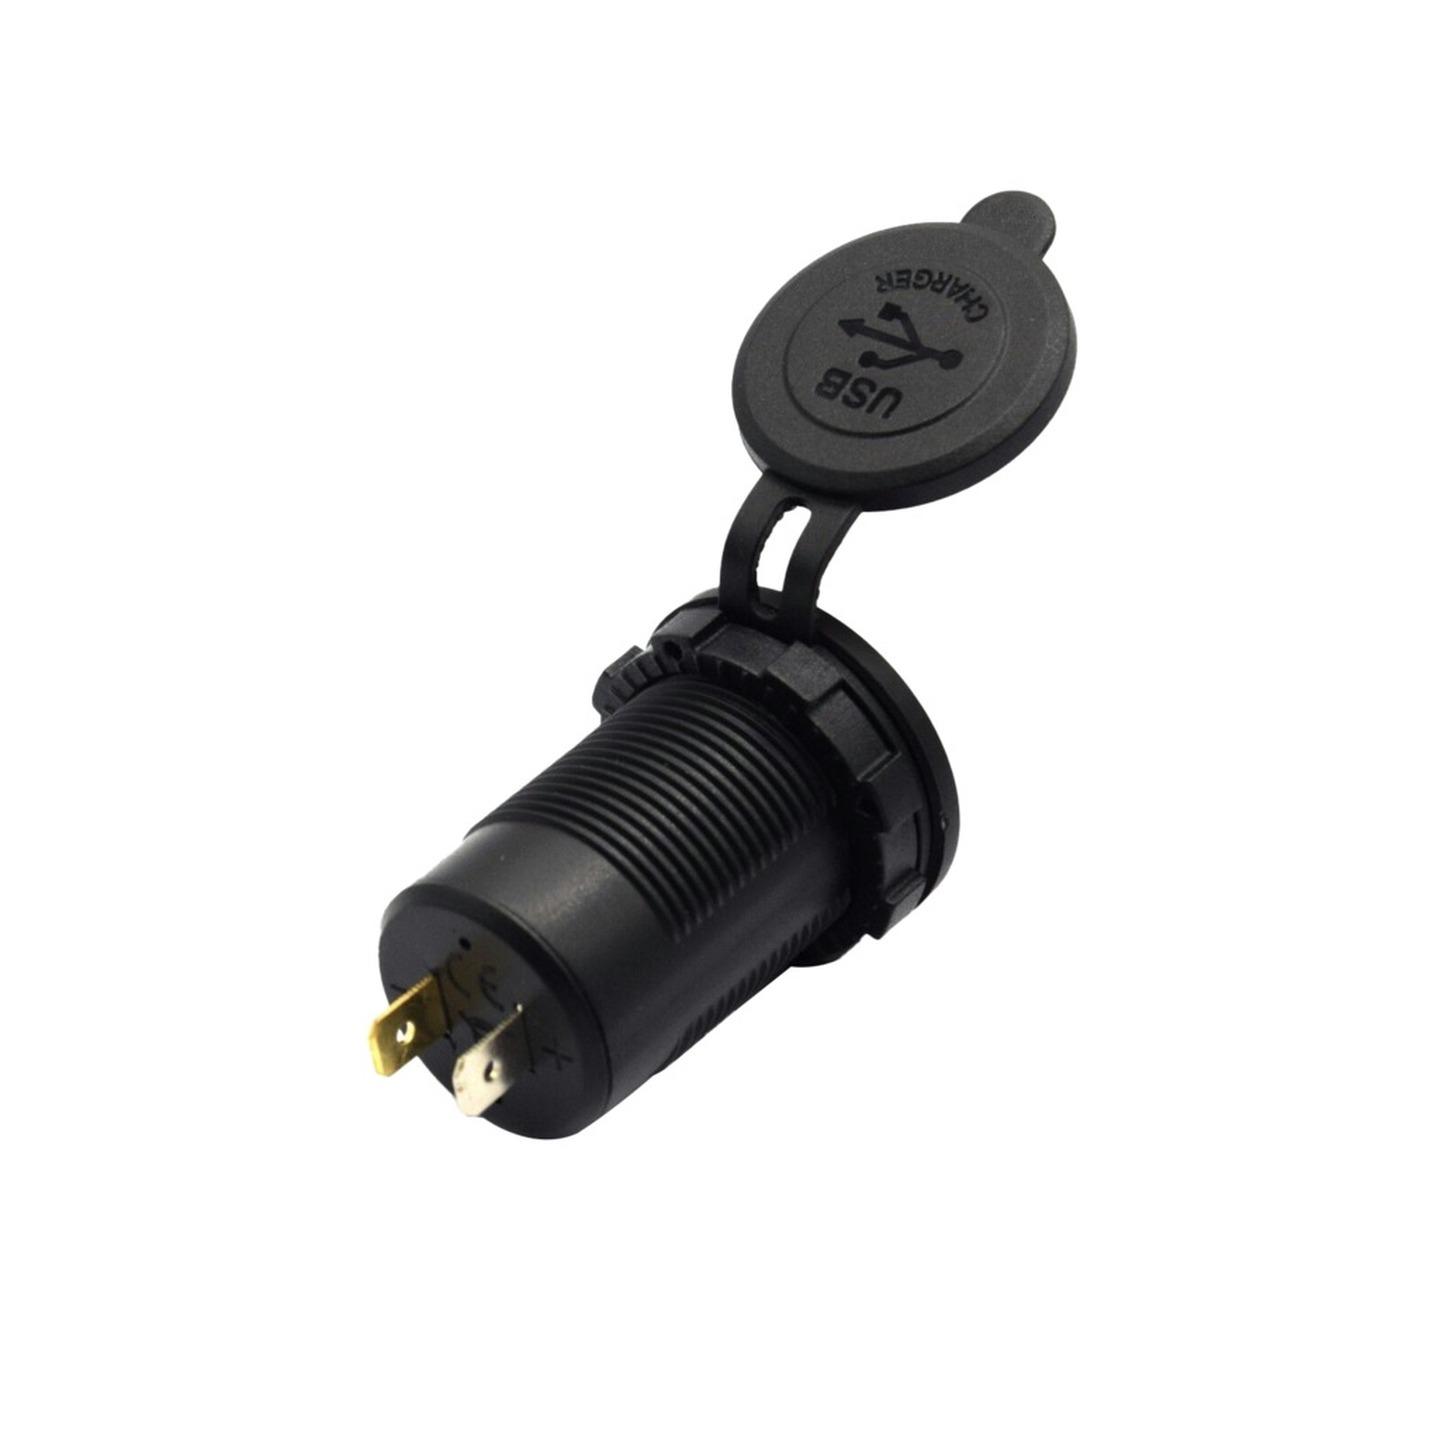 Fast Car Charger Converter 12V DC to USBC 3.0 and 65W PD 3.0 